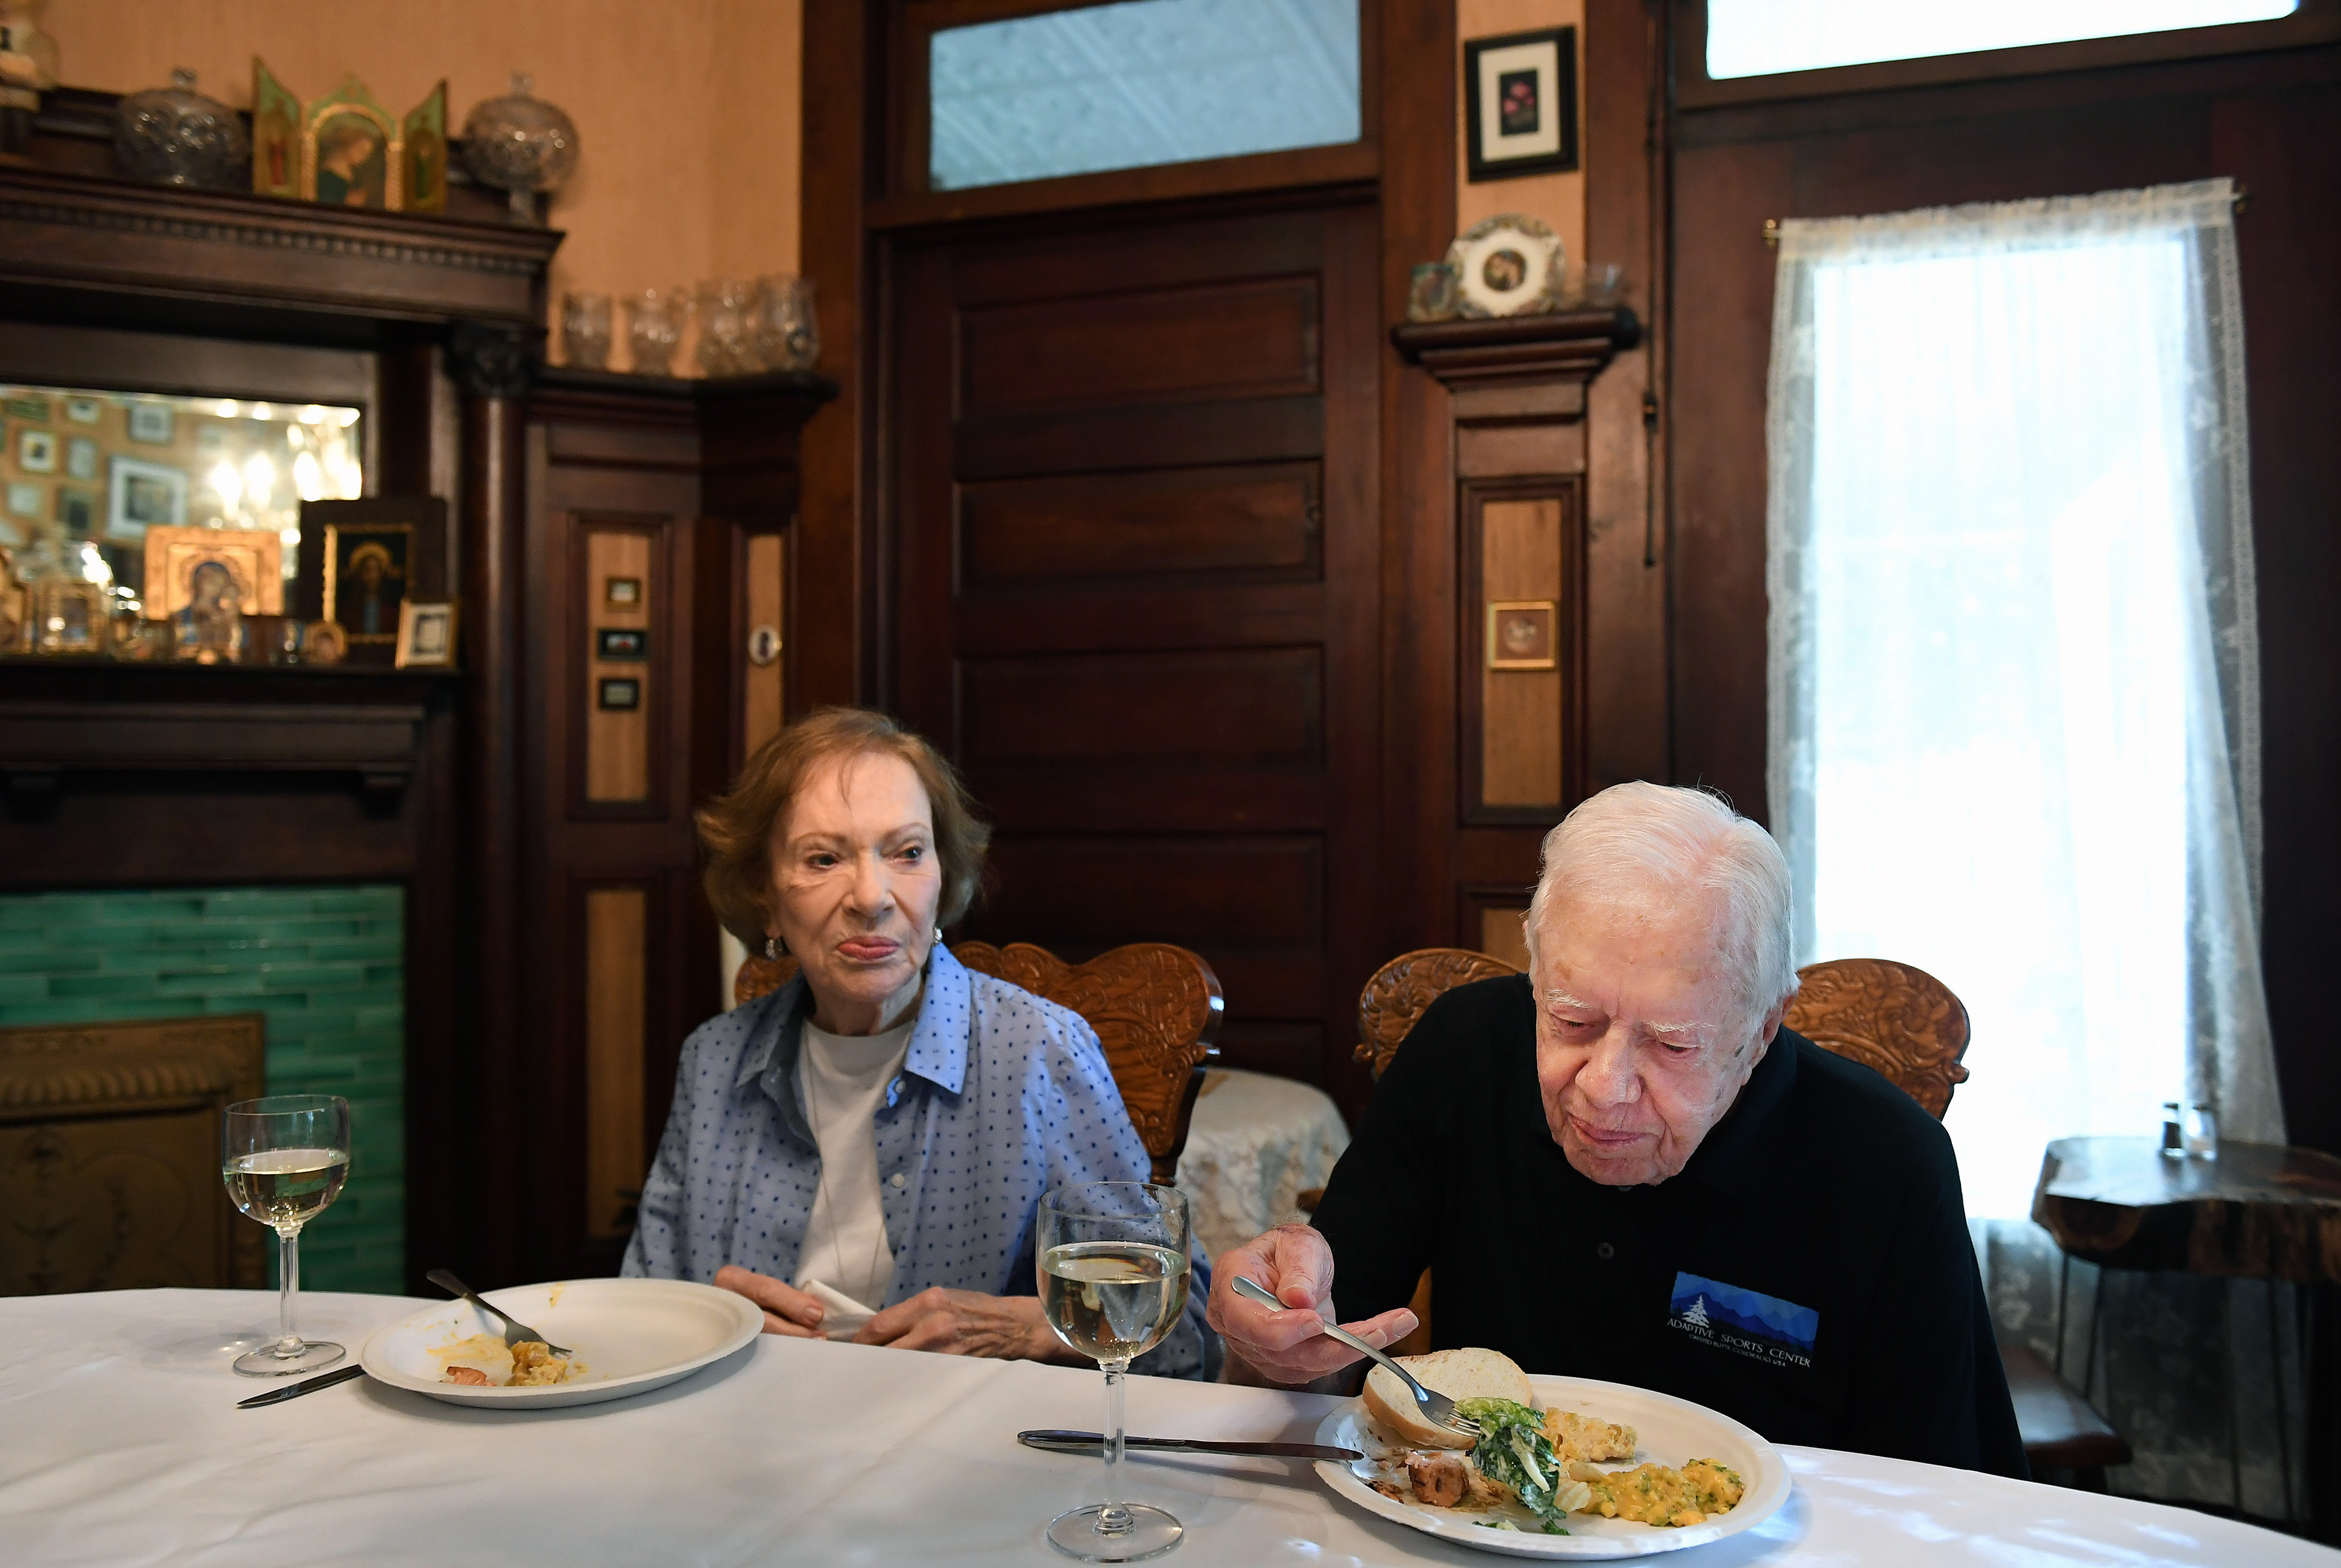 Jimmy Carter and his wife Rosalynn, enjoying a meal at the home of their close friend, Jill Stuckey on August 4, 2018 in Plains, Georgia | Source: Getty Images